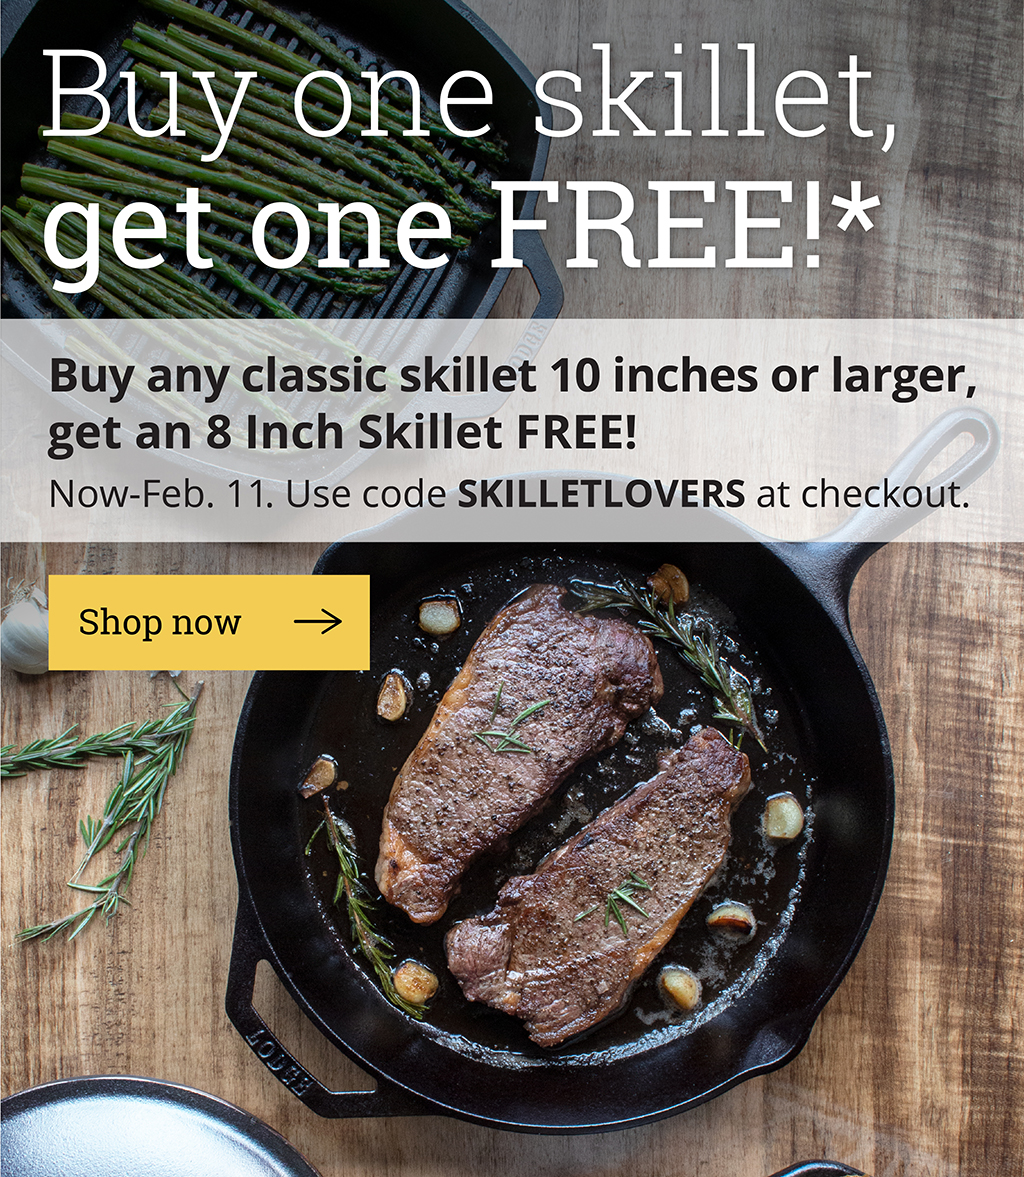 Buy one skillet, get one FREE!*  Buy any skillet 10 inches or larger, get an 8 Inch Skillet FREE!  Now-Feb. 11.  Use code SKILLETLOVERS at checkout.  [Shop now]